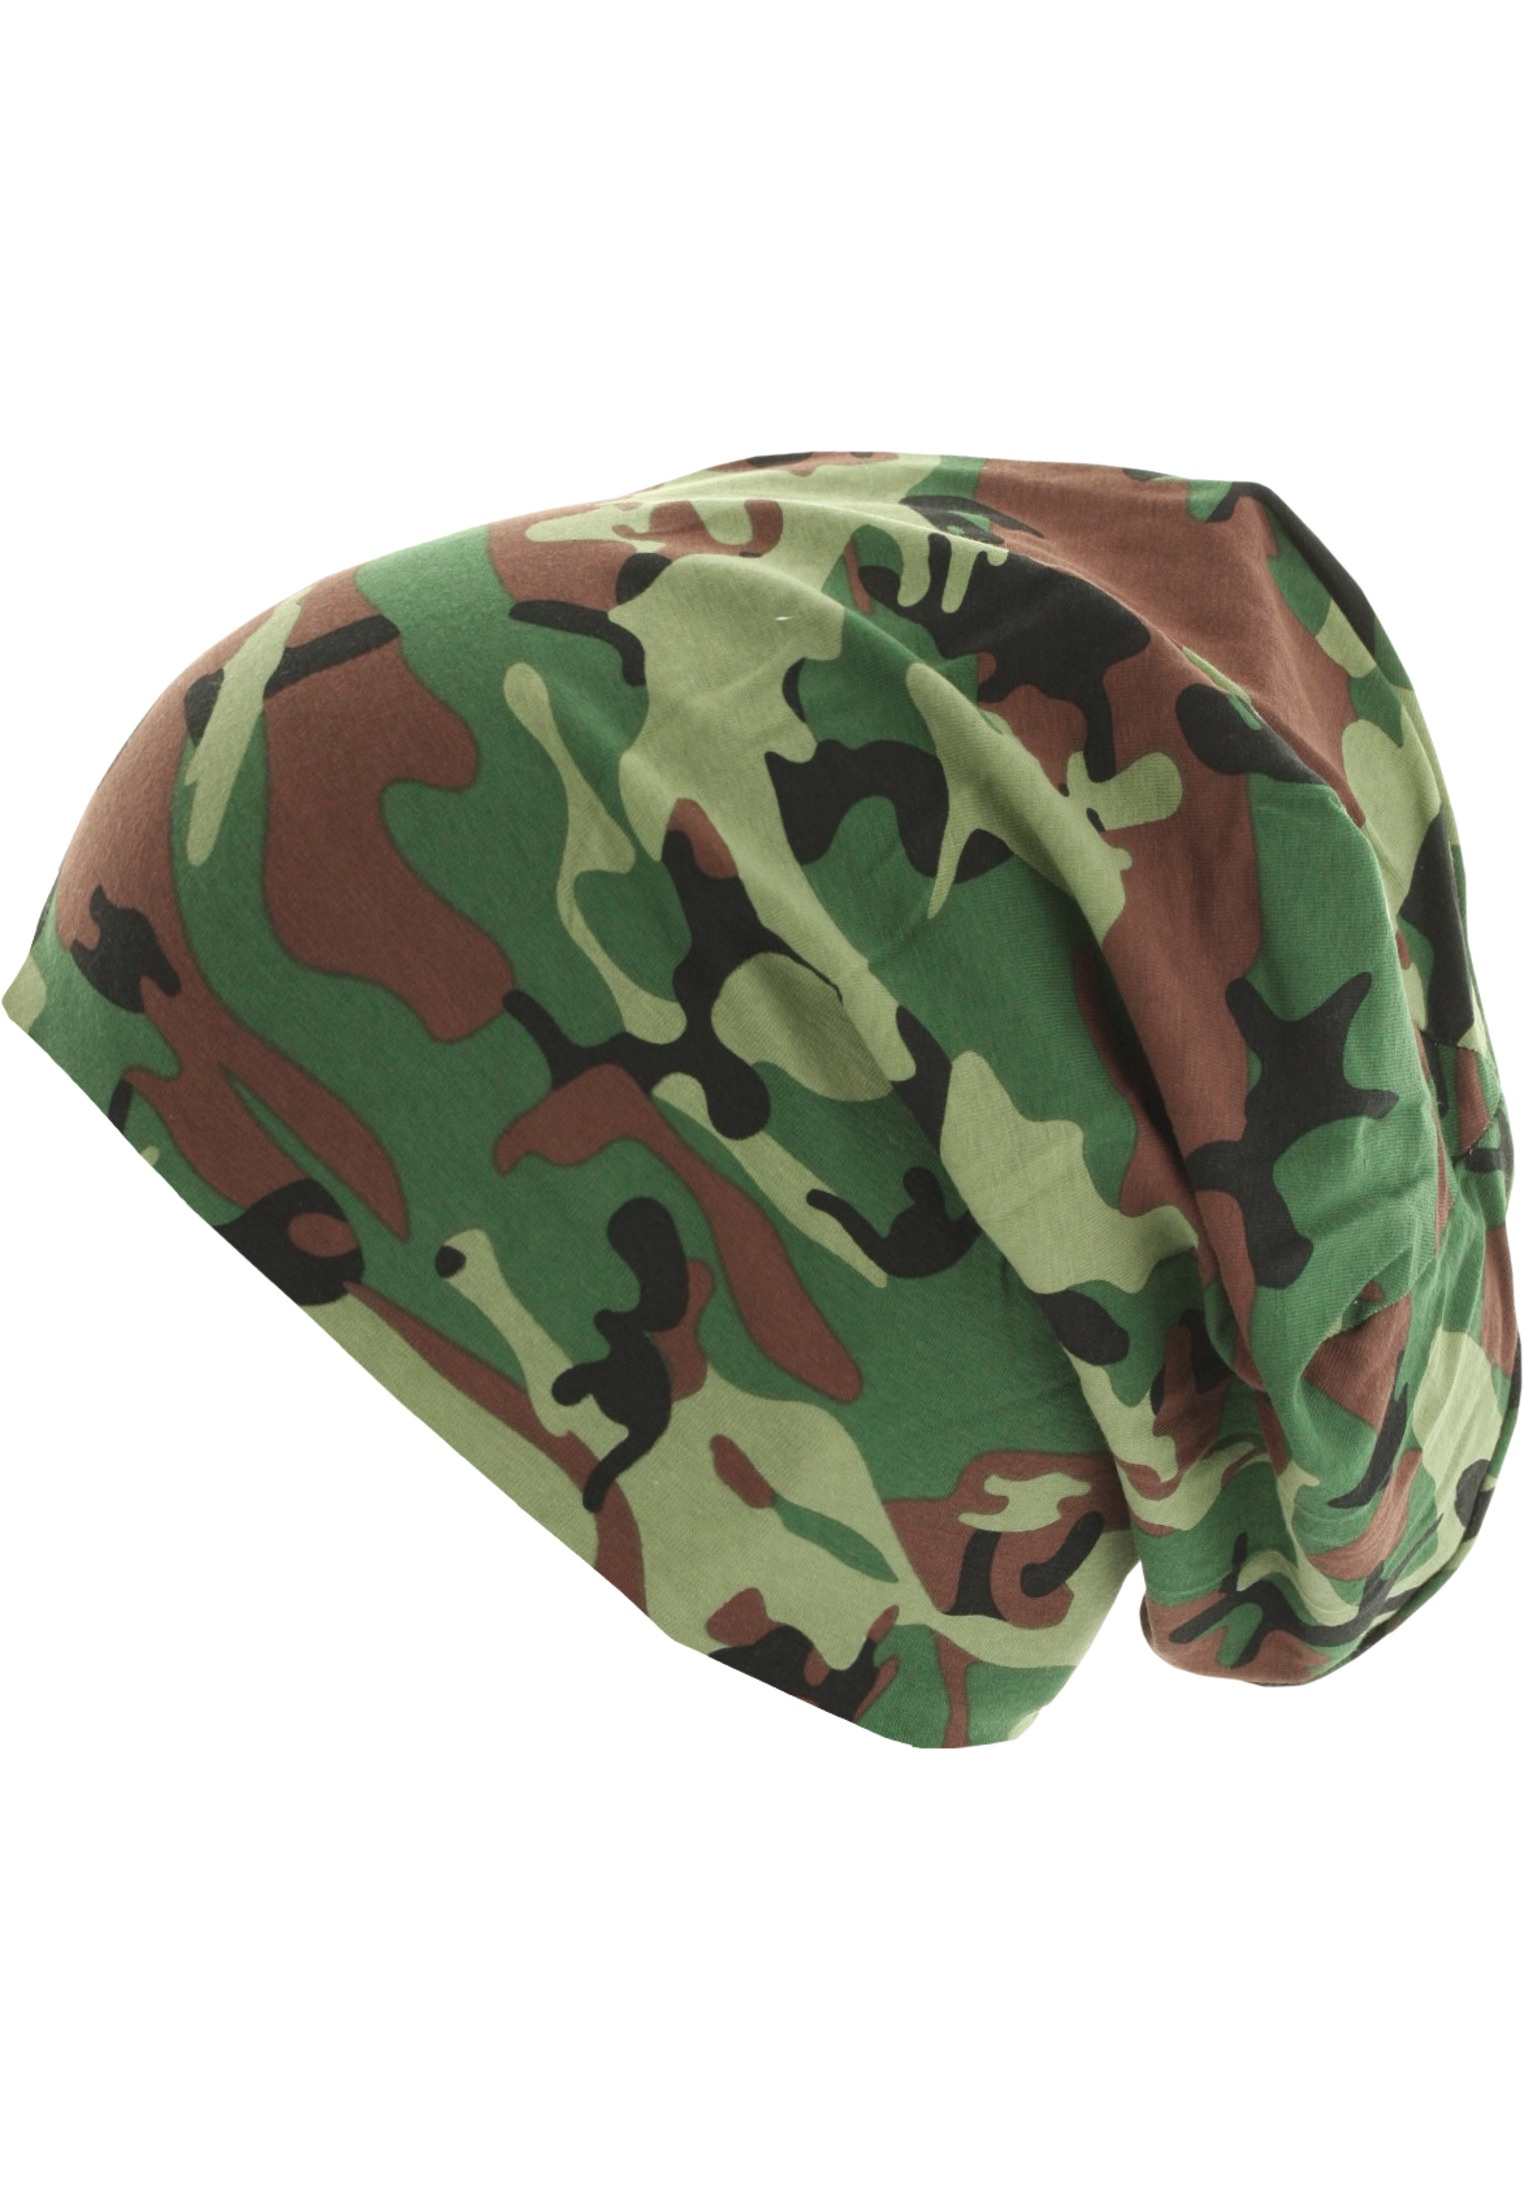 Caps & Beanies Printed Jersey Beanie in Farbe green camo/black